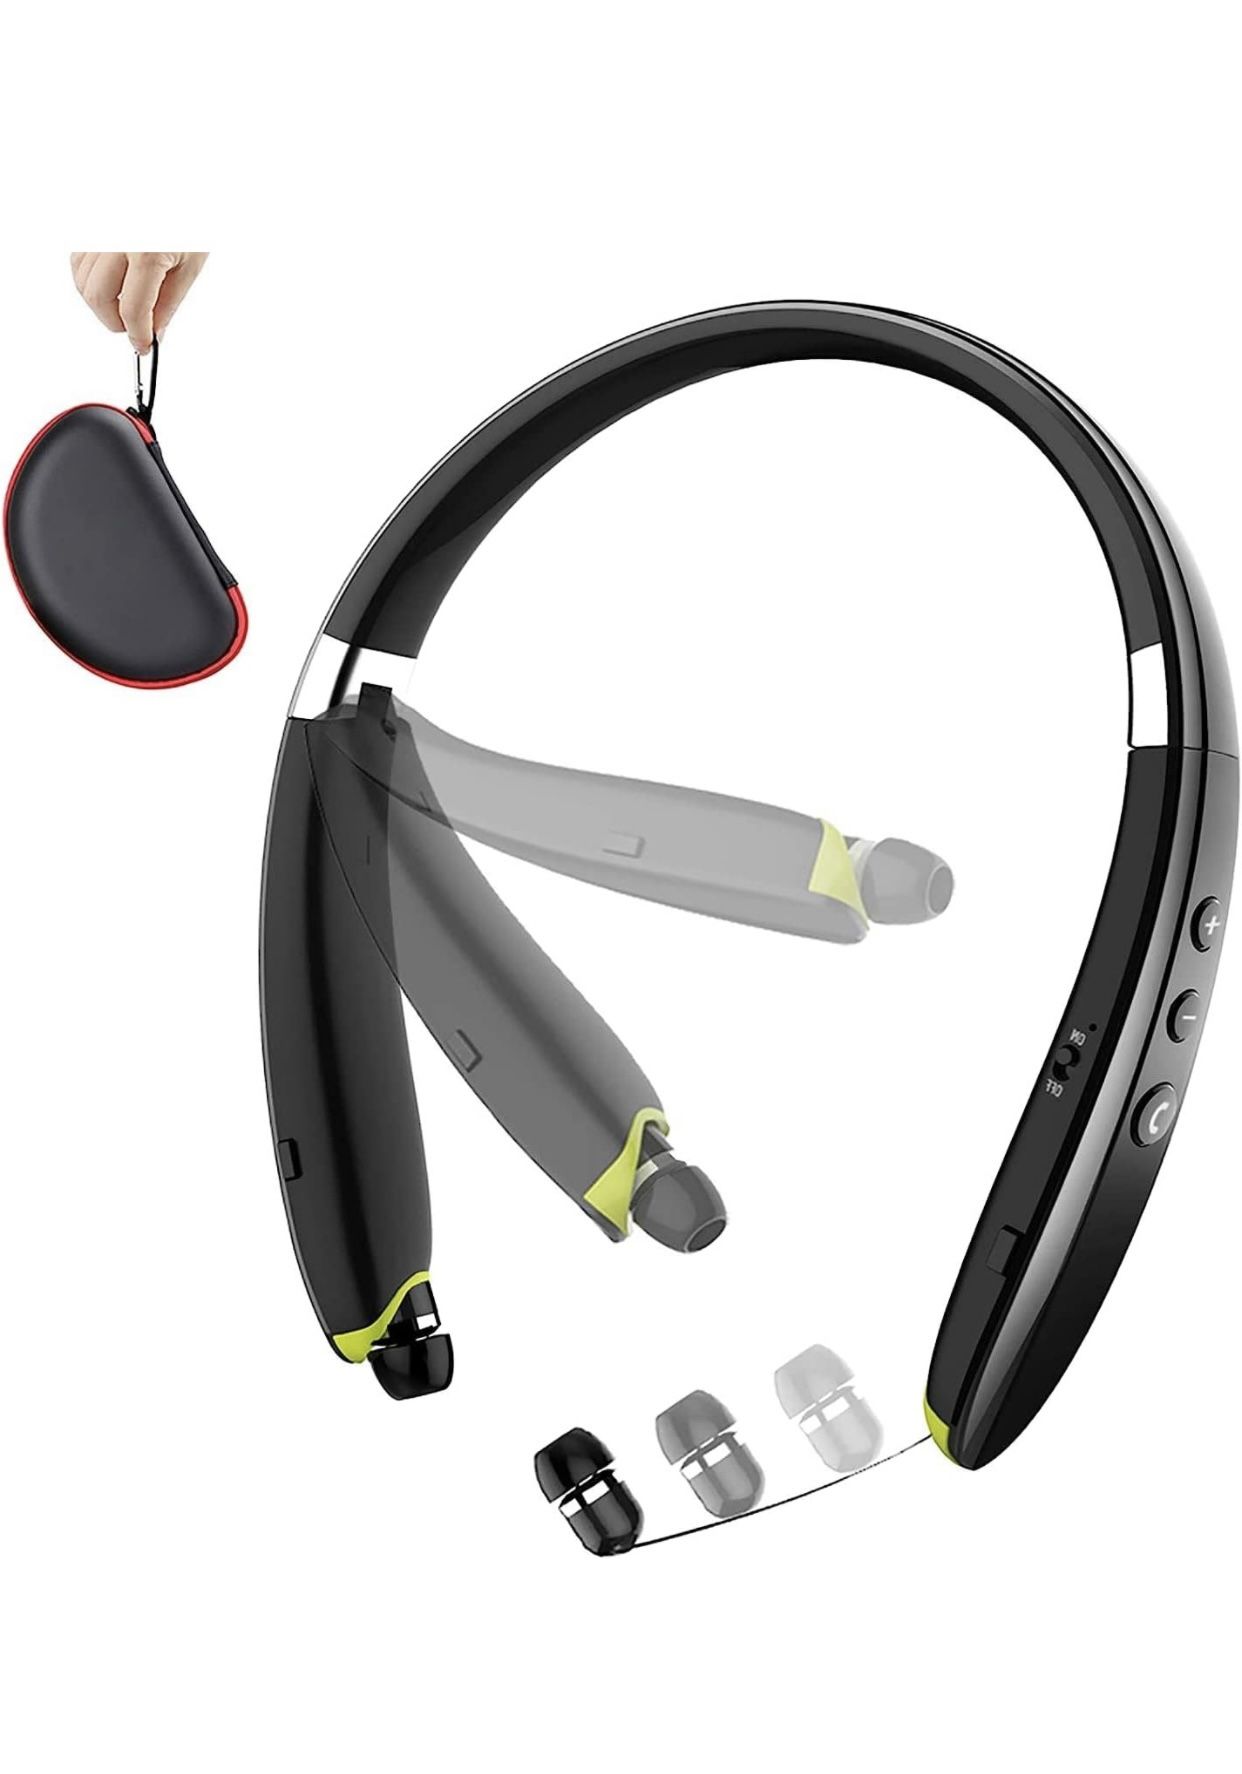 Neckband Bluetooth Headset with Retractable Earbuds, Noise Cancelling Stereo Earphones with Mic, Foldable Wireless Headphones for Sports Exercise